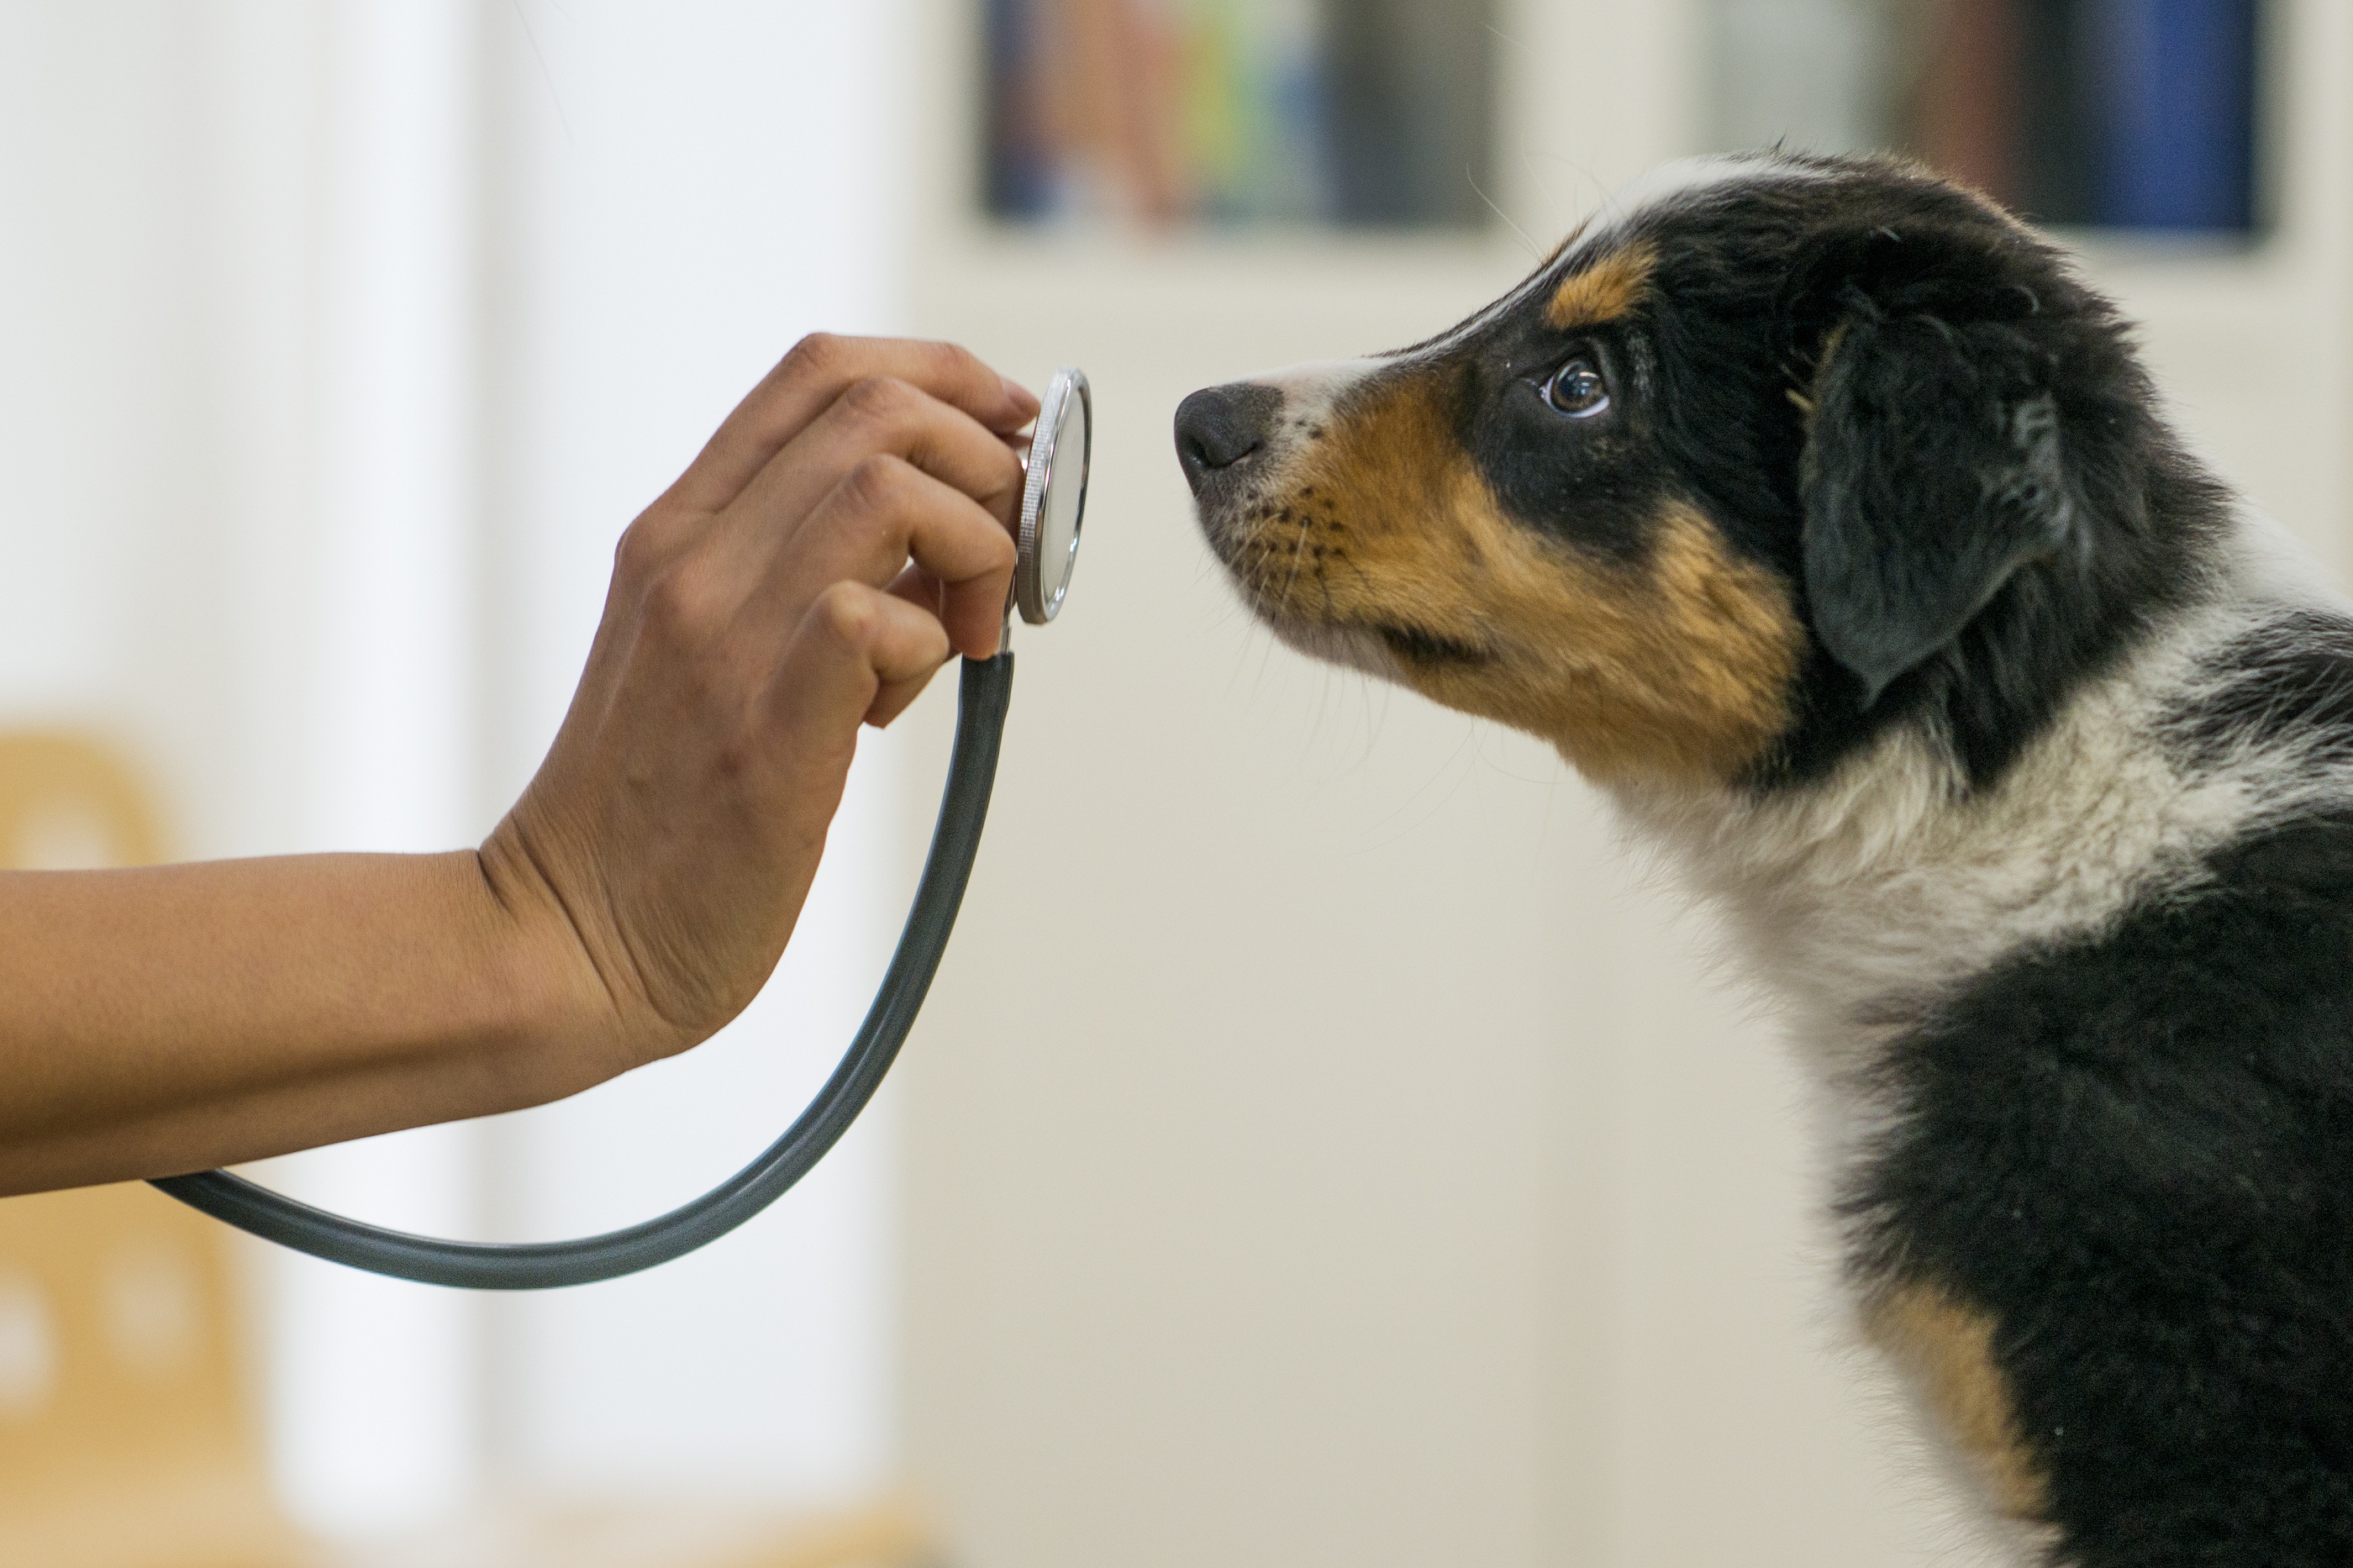 Why is veterinary care so expensive? - Marketplace